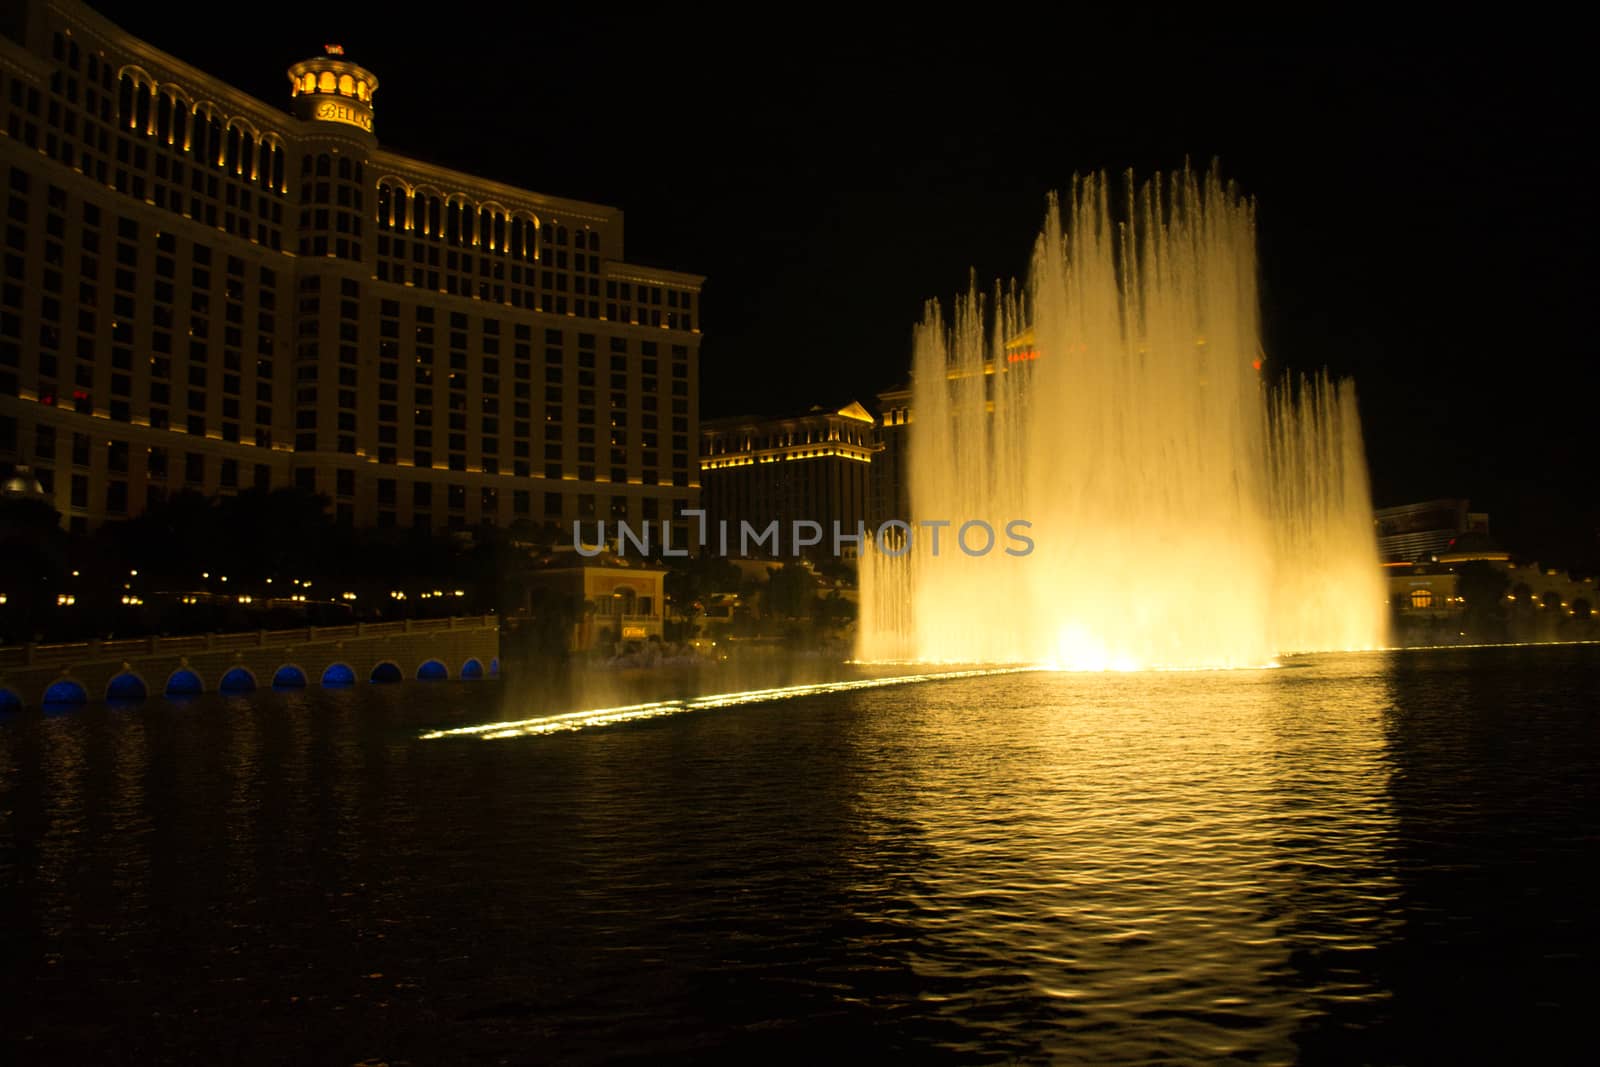 Night view on the Bellagio casino, hotel and resort in Las Vegas, Nevada United States. by kb79